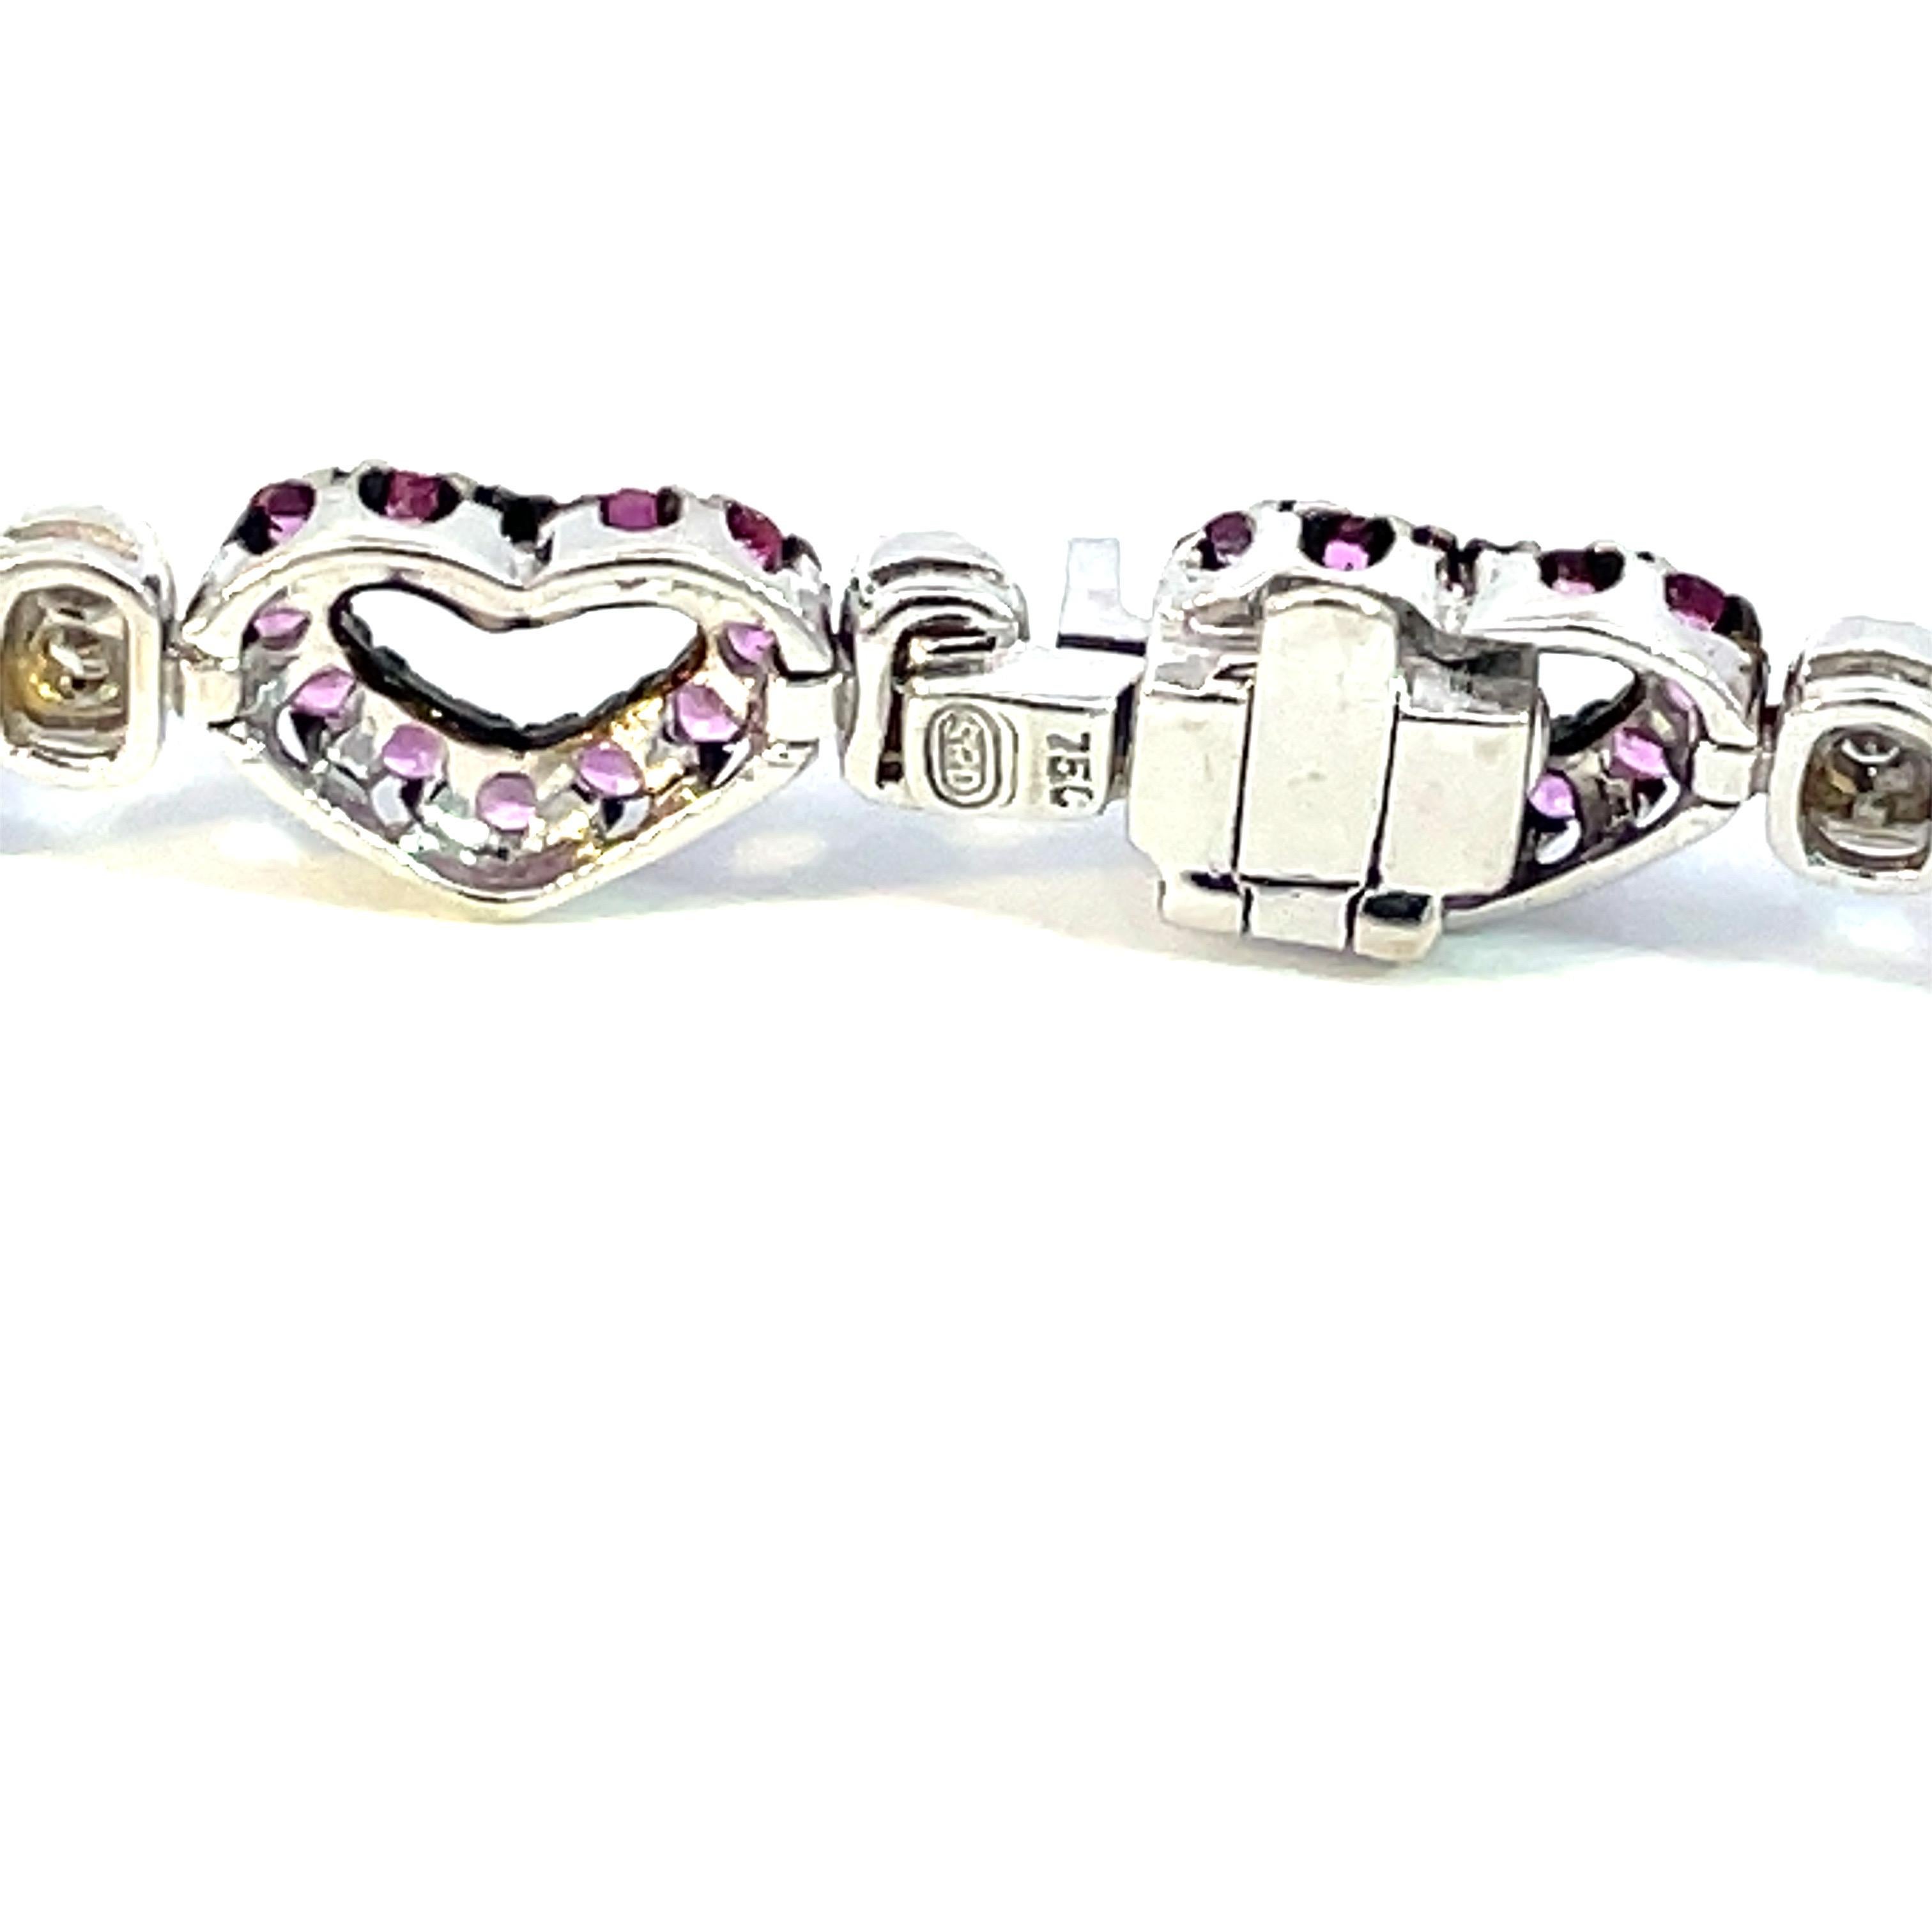 One 18kt white gold hearts shape bracelet with natural pink sapphires and brilliant cut diamonds with a black rhodium finish around the pink sapphires.  Perfect for everyday with a little splash of love. 

168 natural pink sapphires weighing 3.51ct